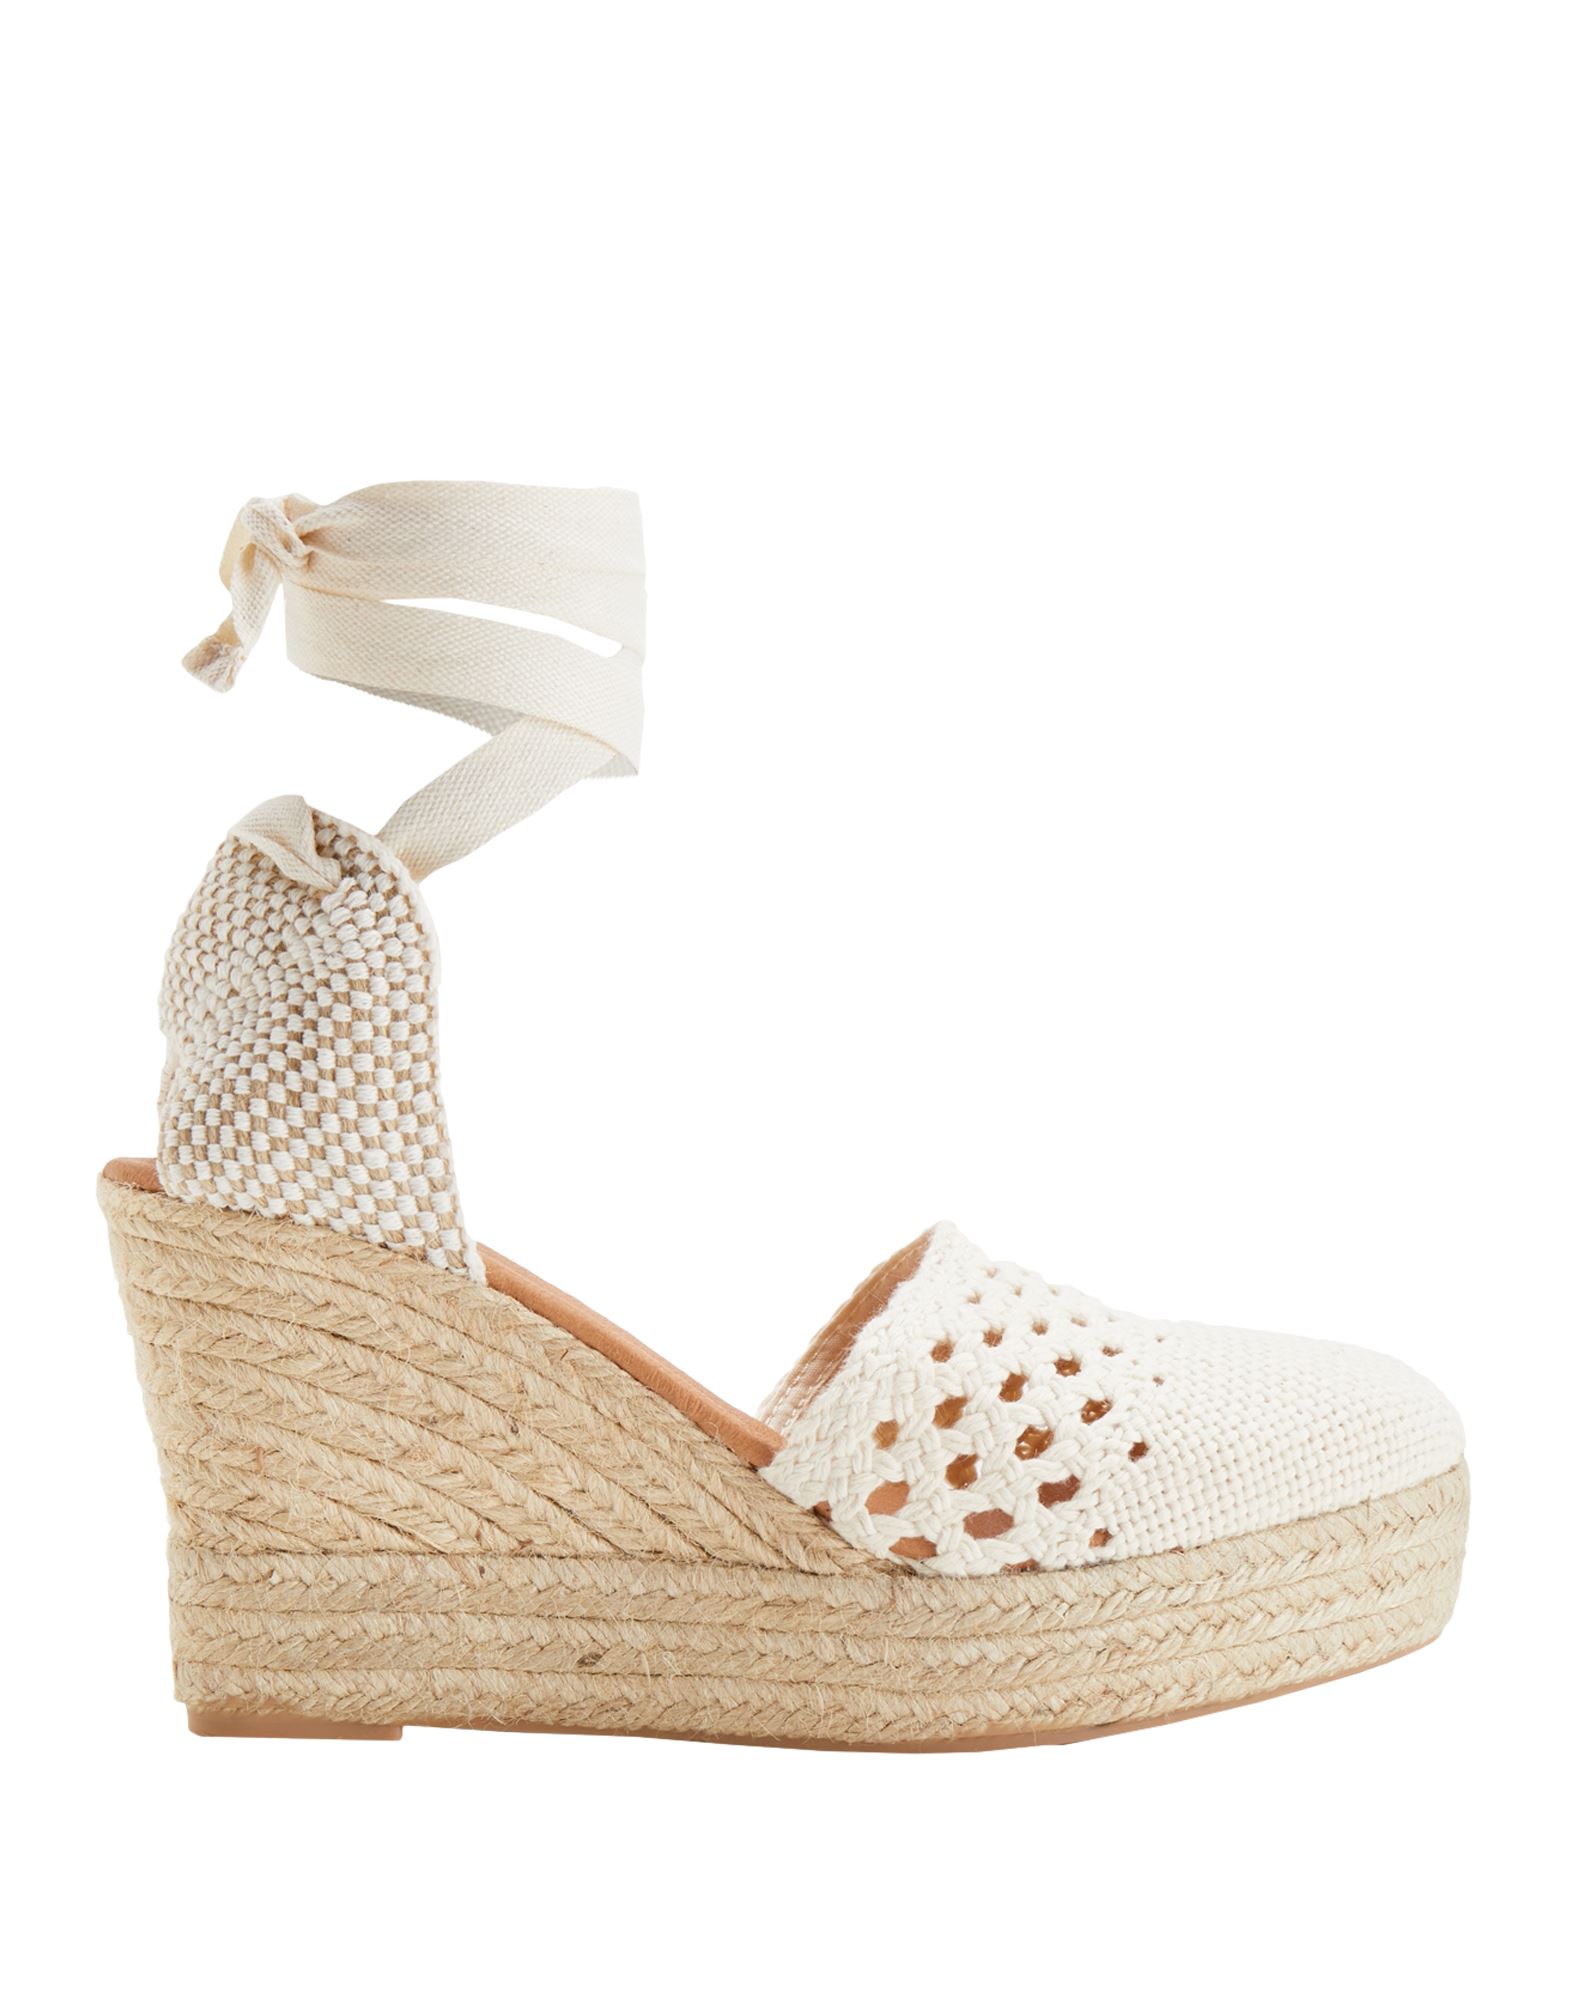 8 By Yoox Espadrilles In White